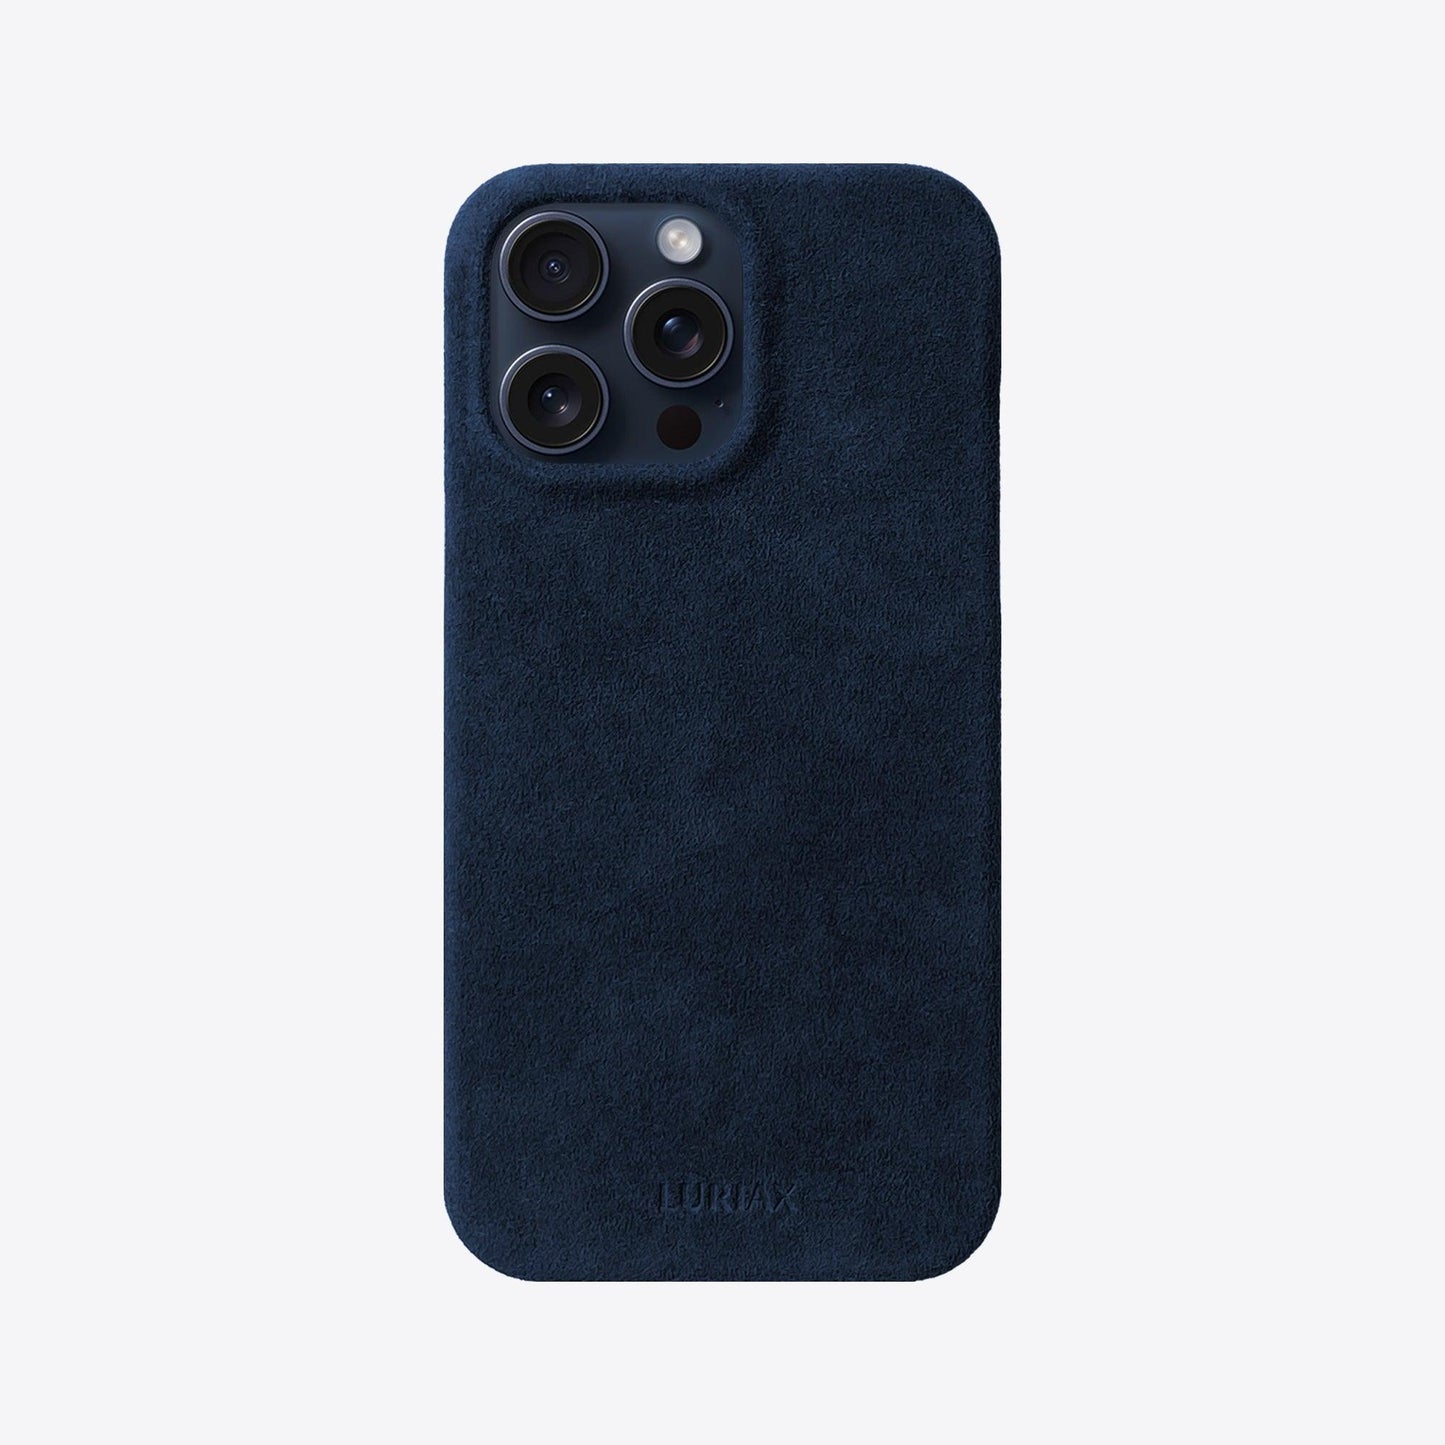 Alcantara Suede Leather iPhone Case and Accessories Collection - The Sport iPhone Case - Dark Blue - Luriax